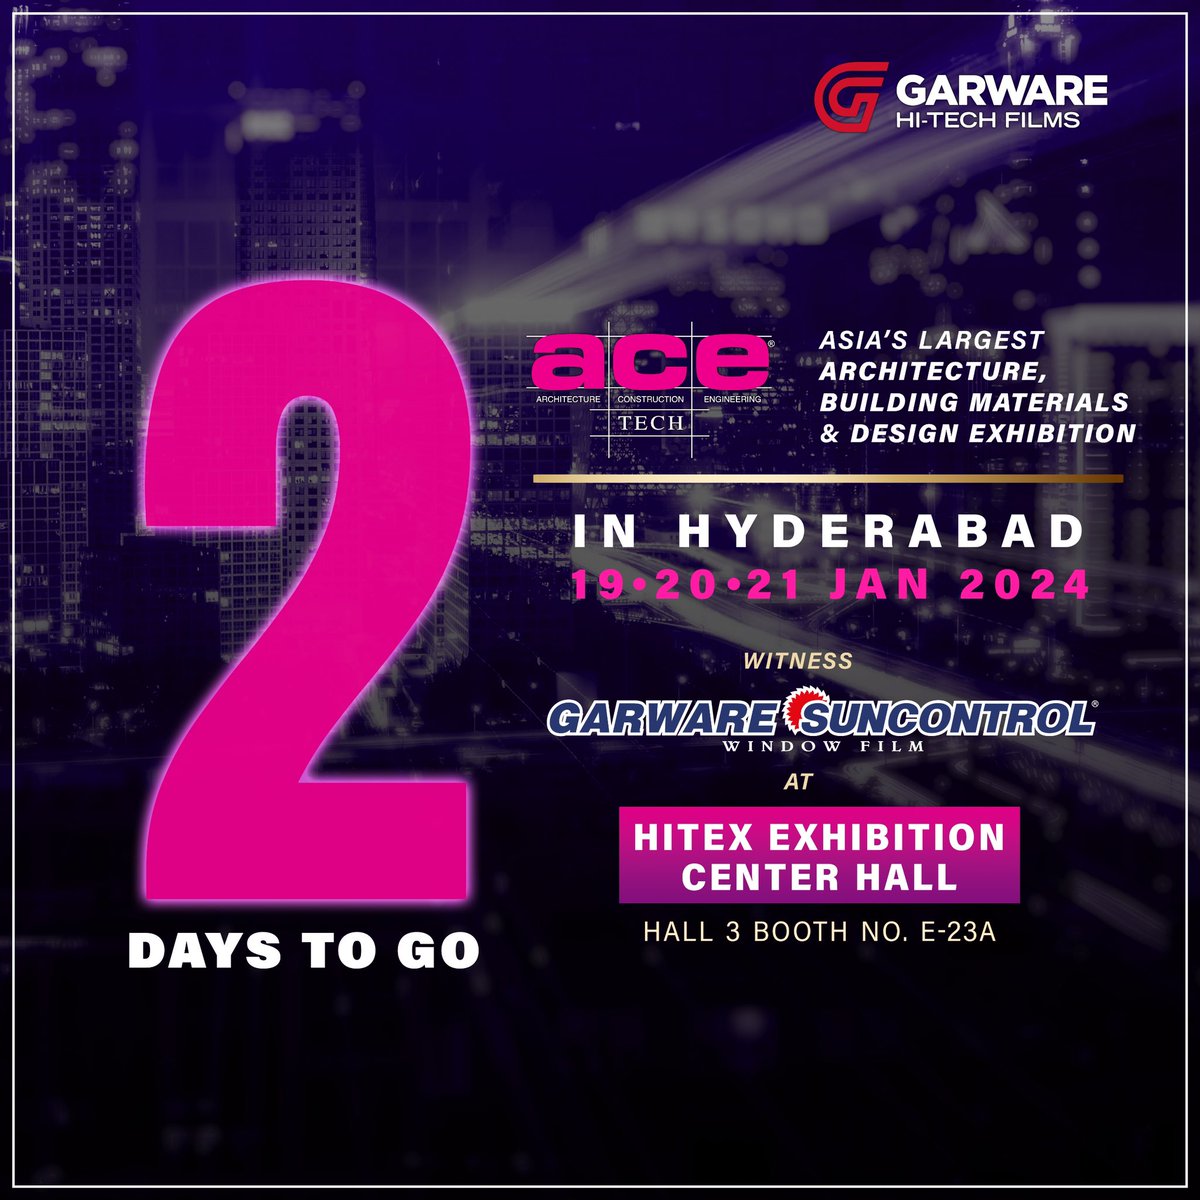 TWO days to go for ACE tech 2024 and we can't wait to showcase the latest we have to offer in Window film Technology. Get ready to Visit Garware Suncontrol Window Films stall at HITEX EXHIBITION CENTER. . . . . #ACEtech #Hydrabad #Architecture #BuildingMaterial #DeaignExhibition